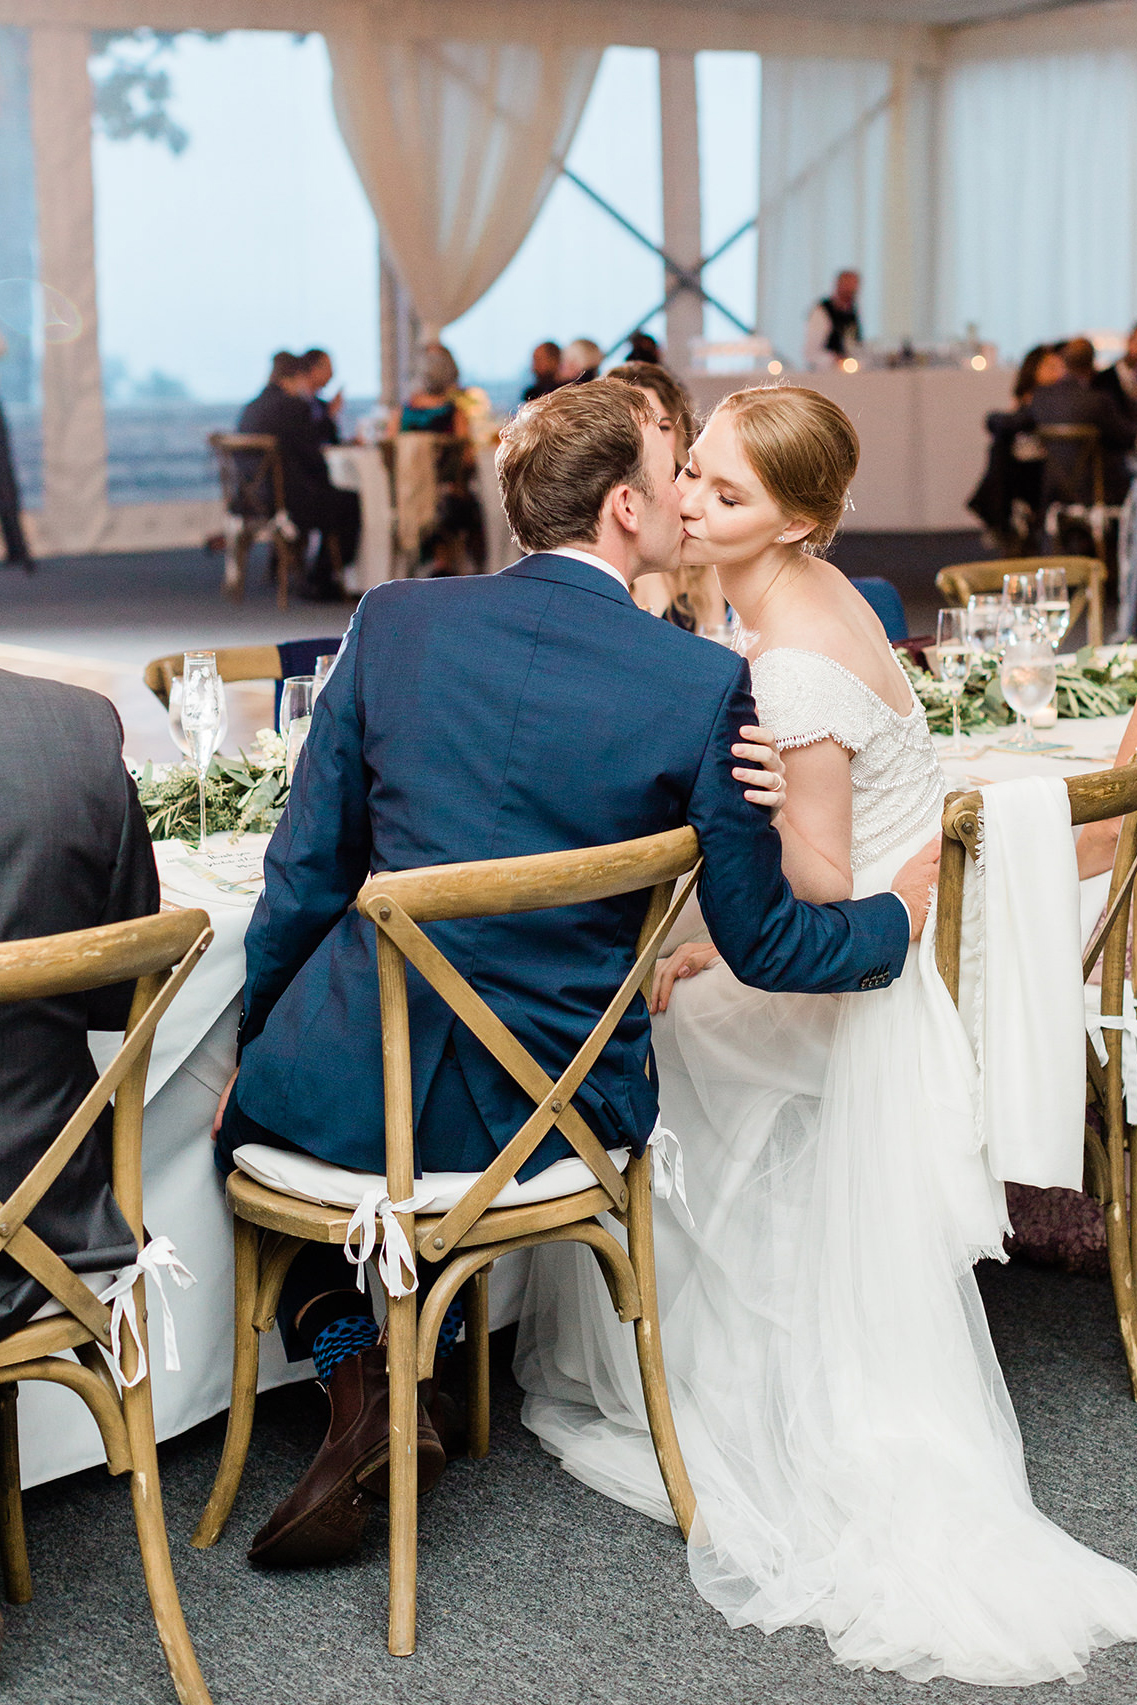 Bride and groom embracing during a Sleepy Hollow wedding reception